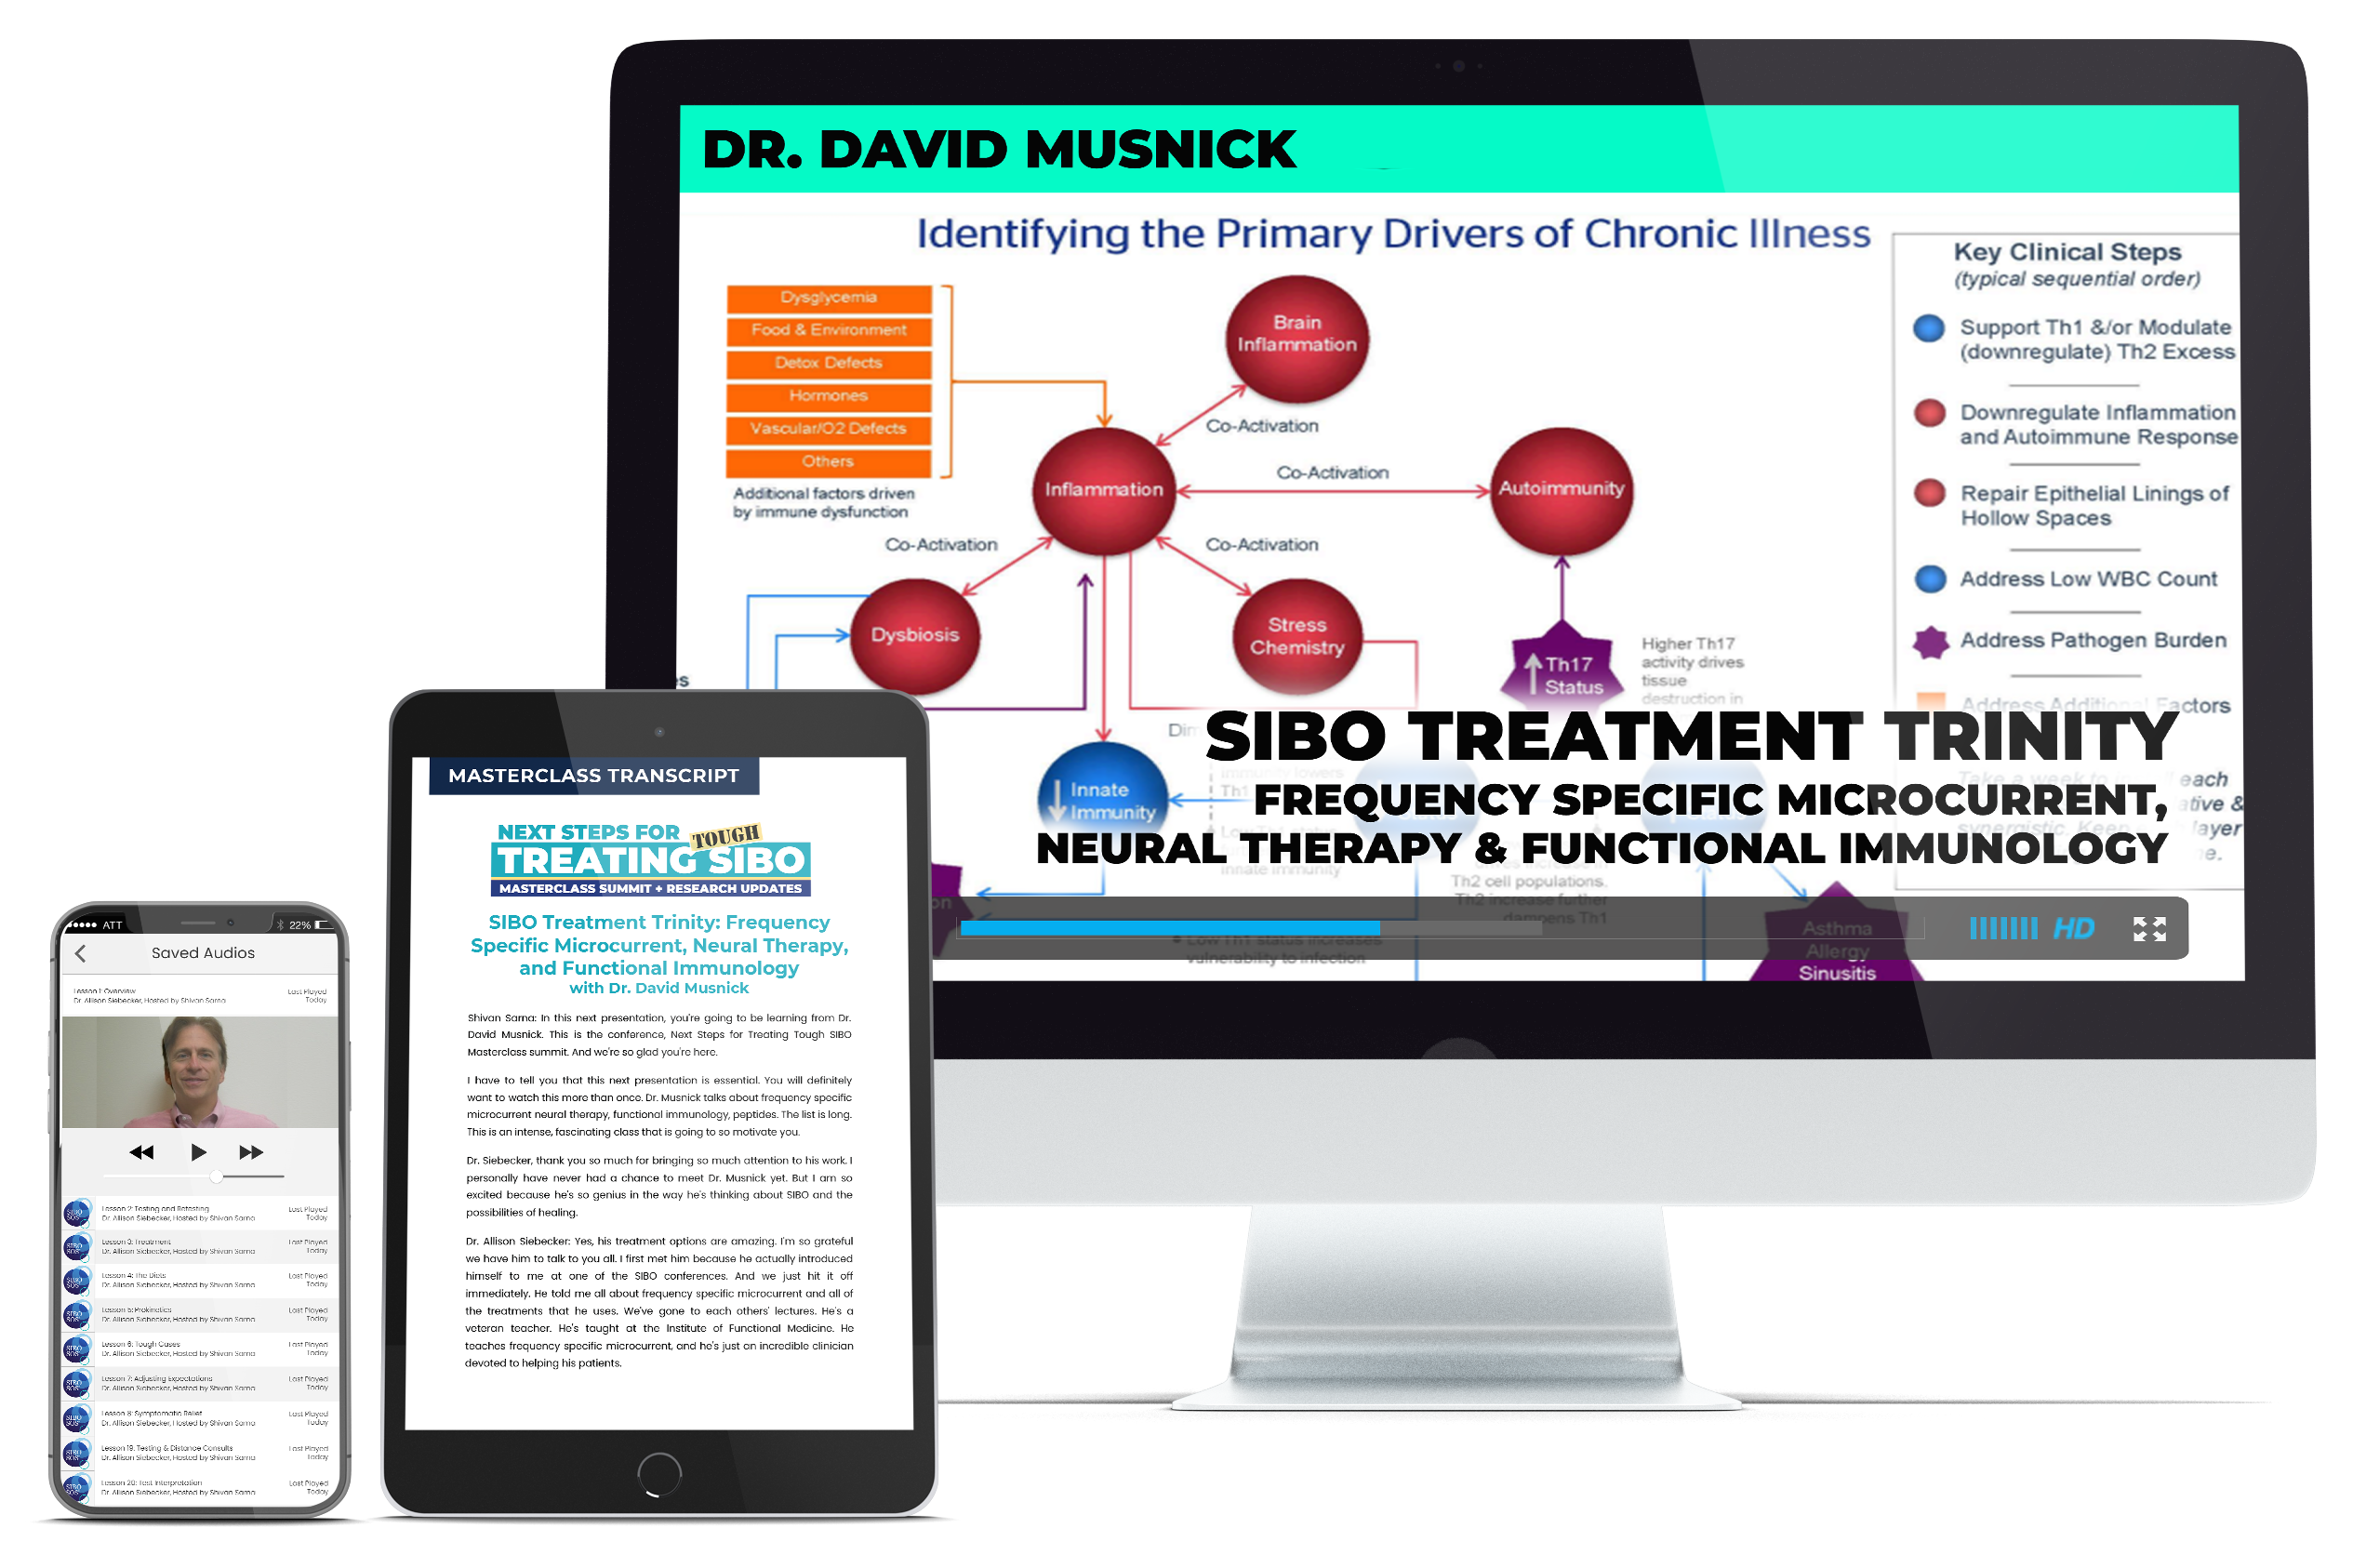 SIBO Treatment Trinity: Frequency Specific Microcurrent, Neural Therapy, and Functional Immunology​ with Dr. David Musnick